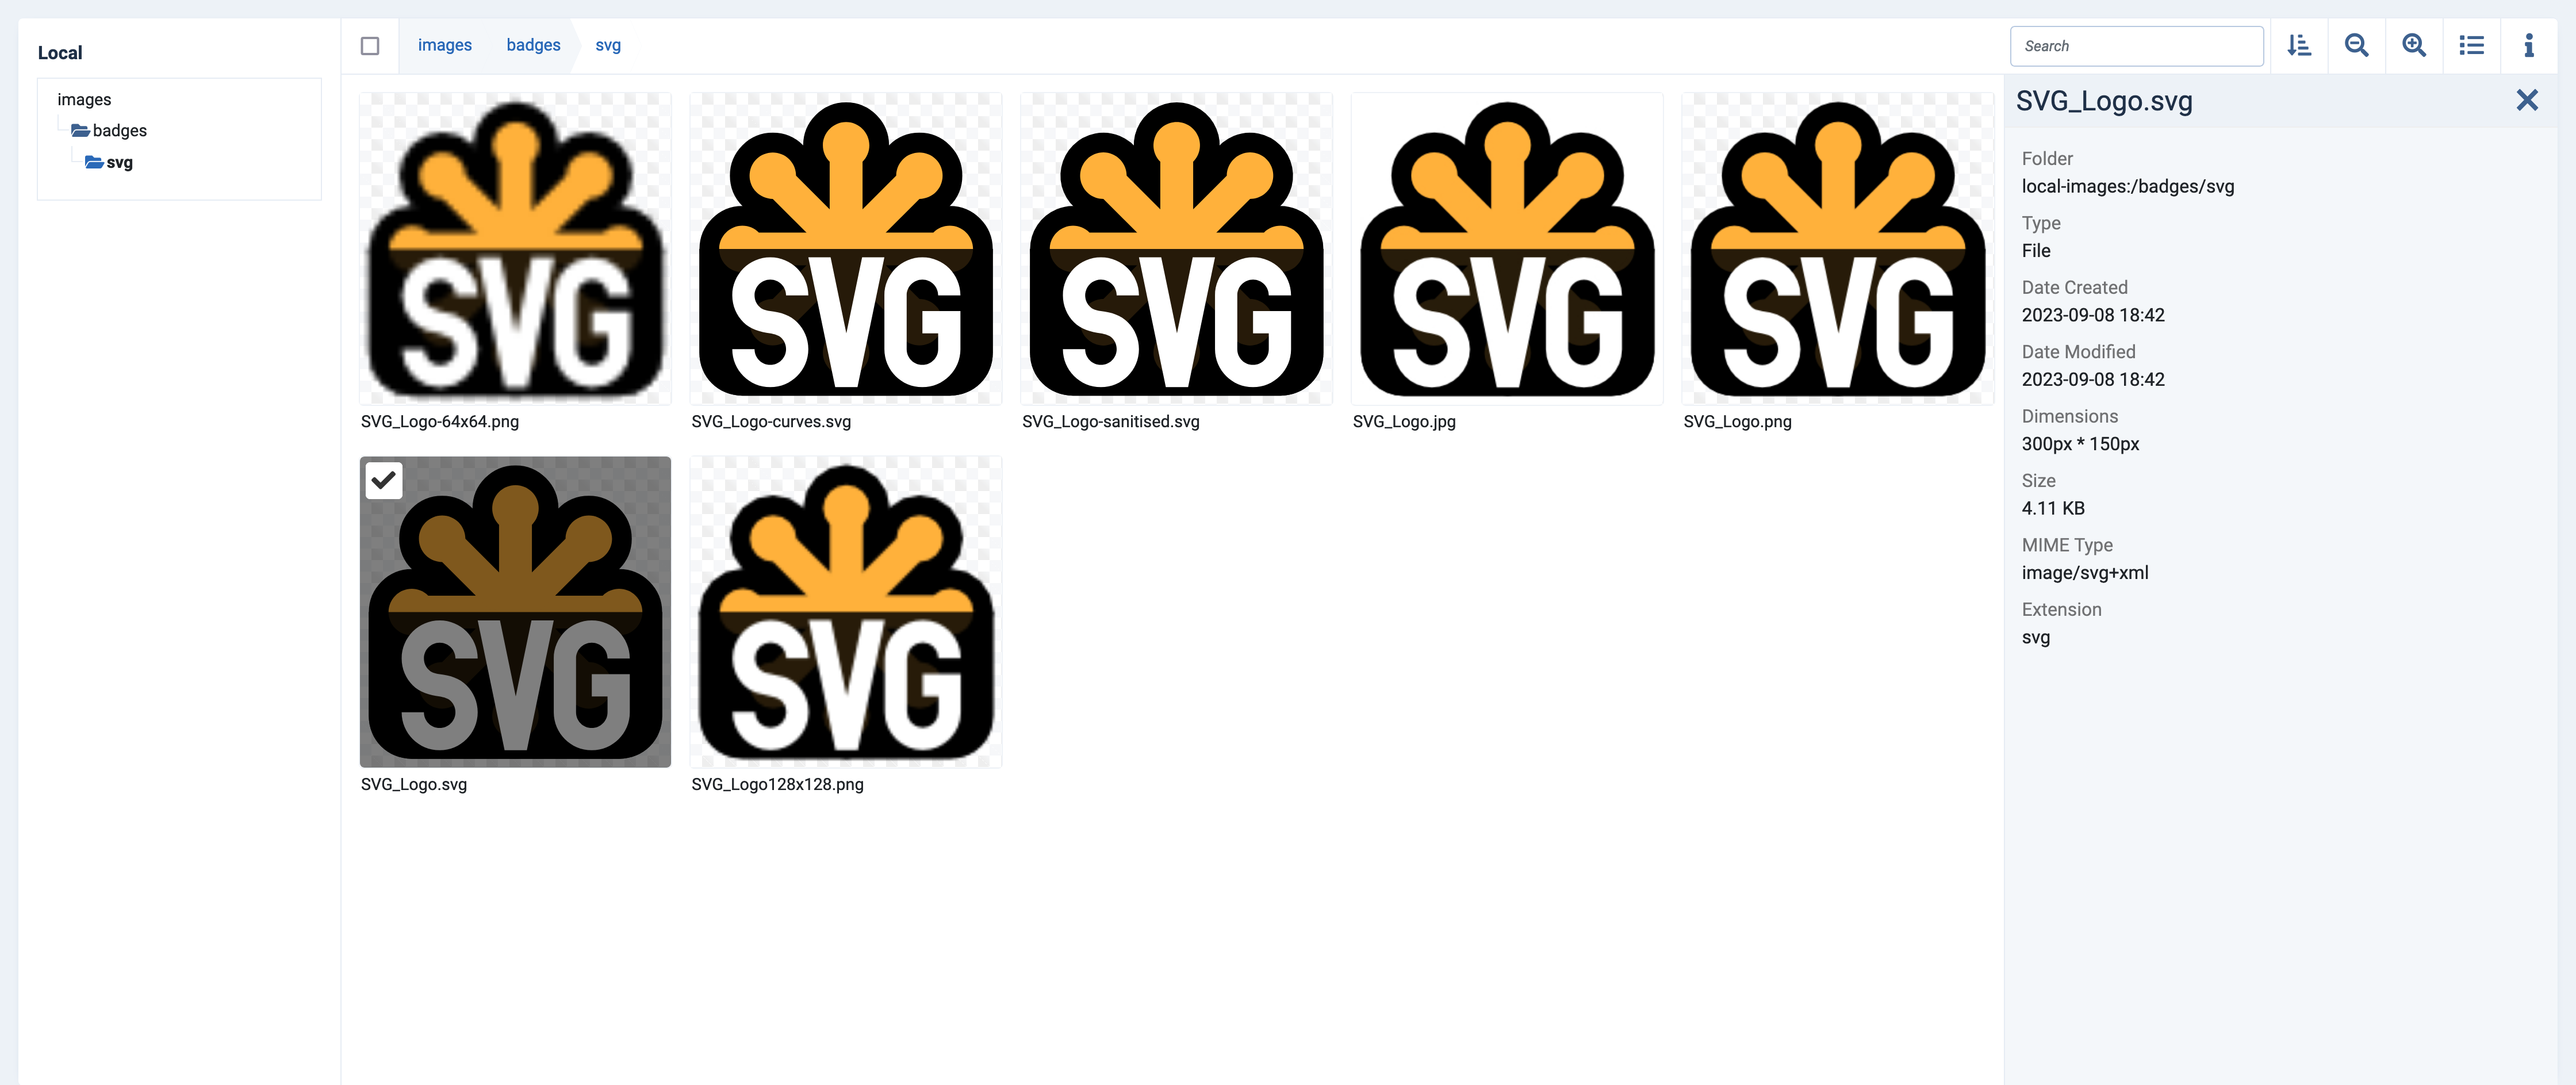 All the different variations of the SVG Logo in Joomla media manager